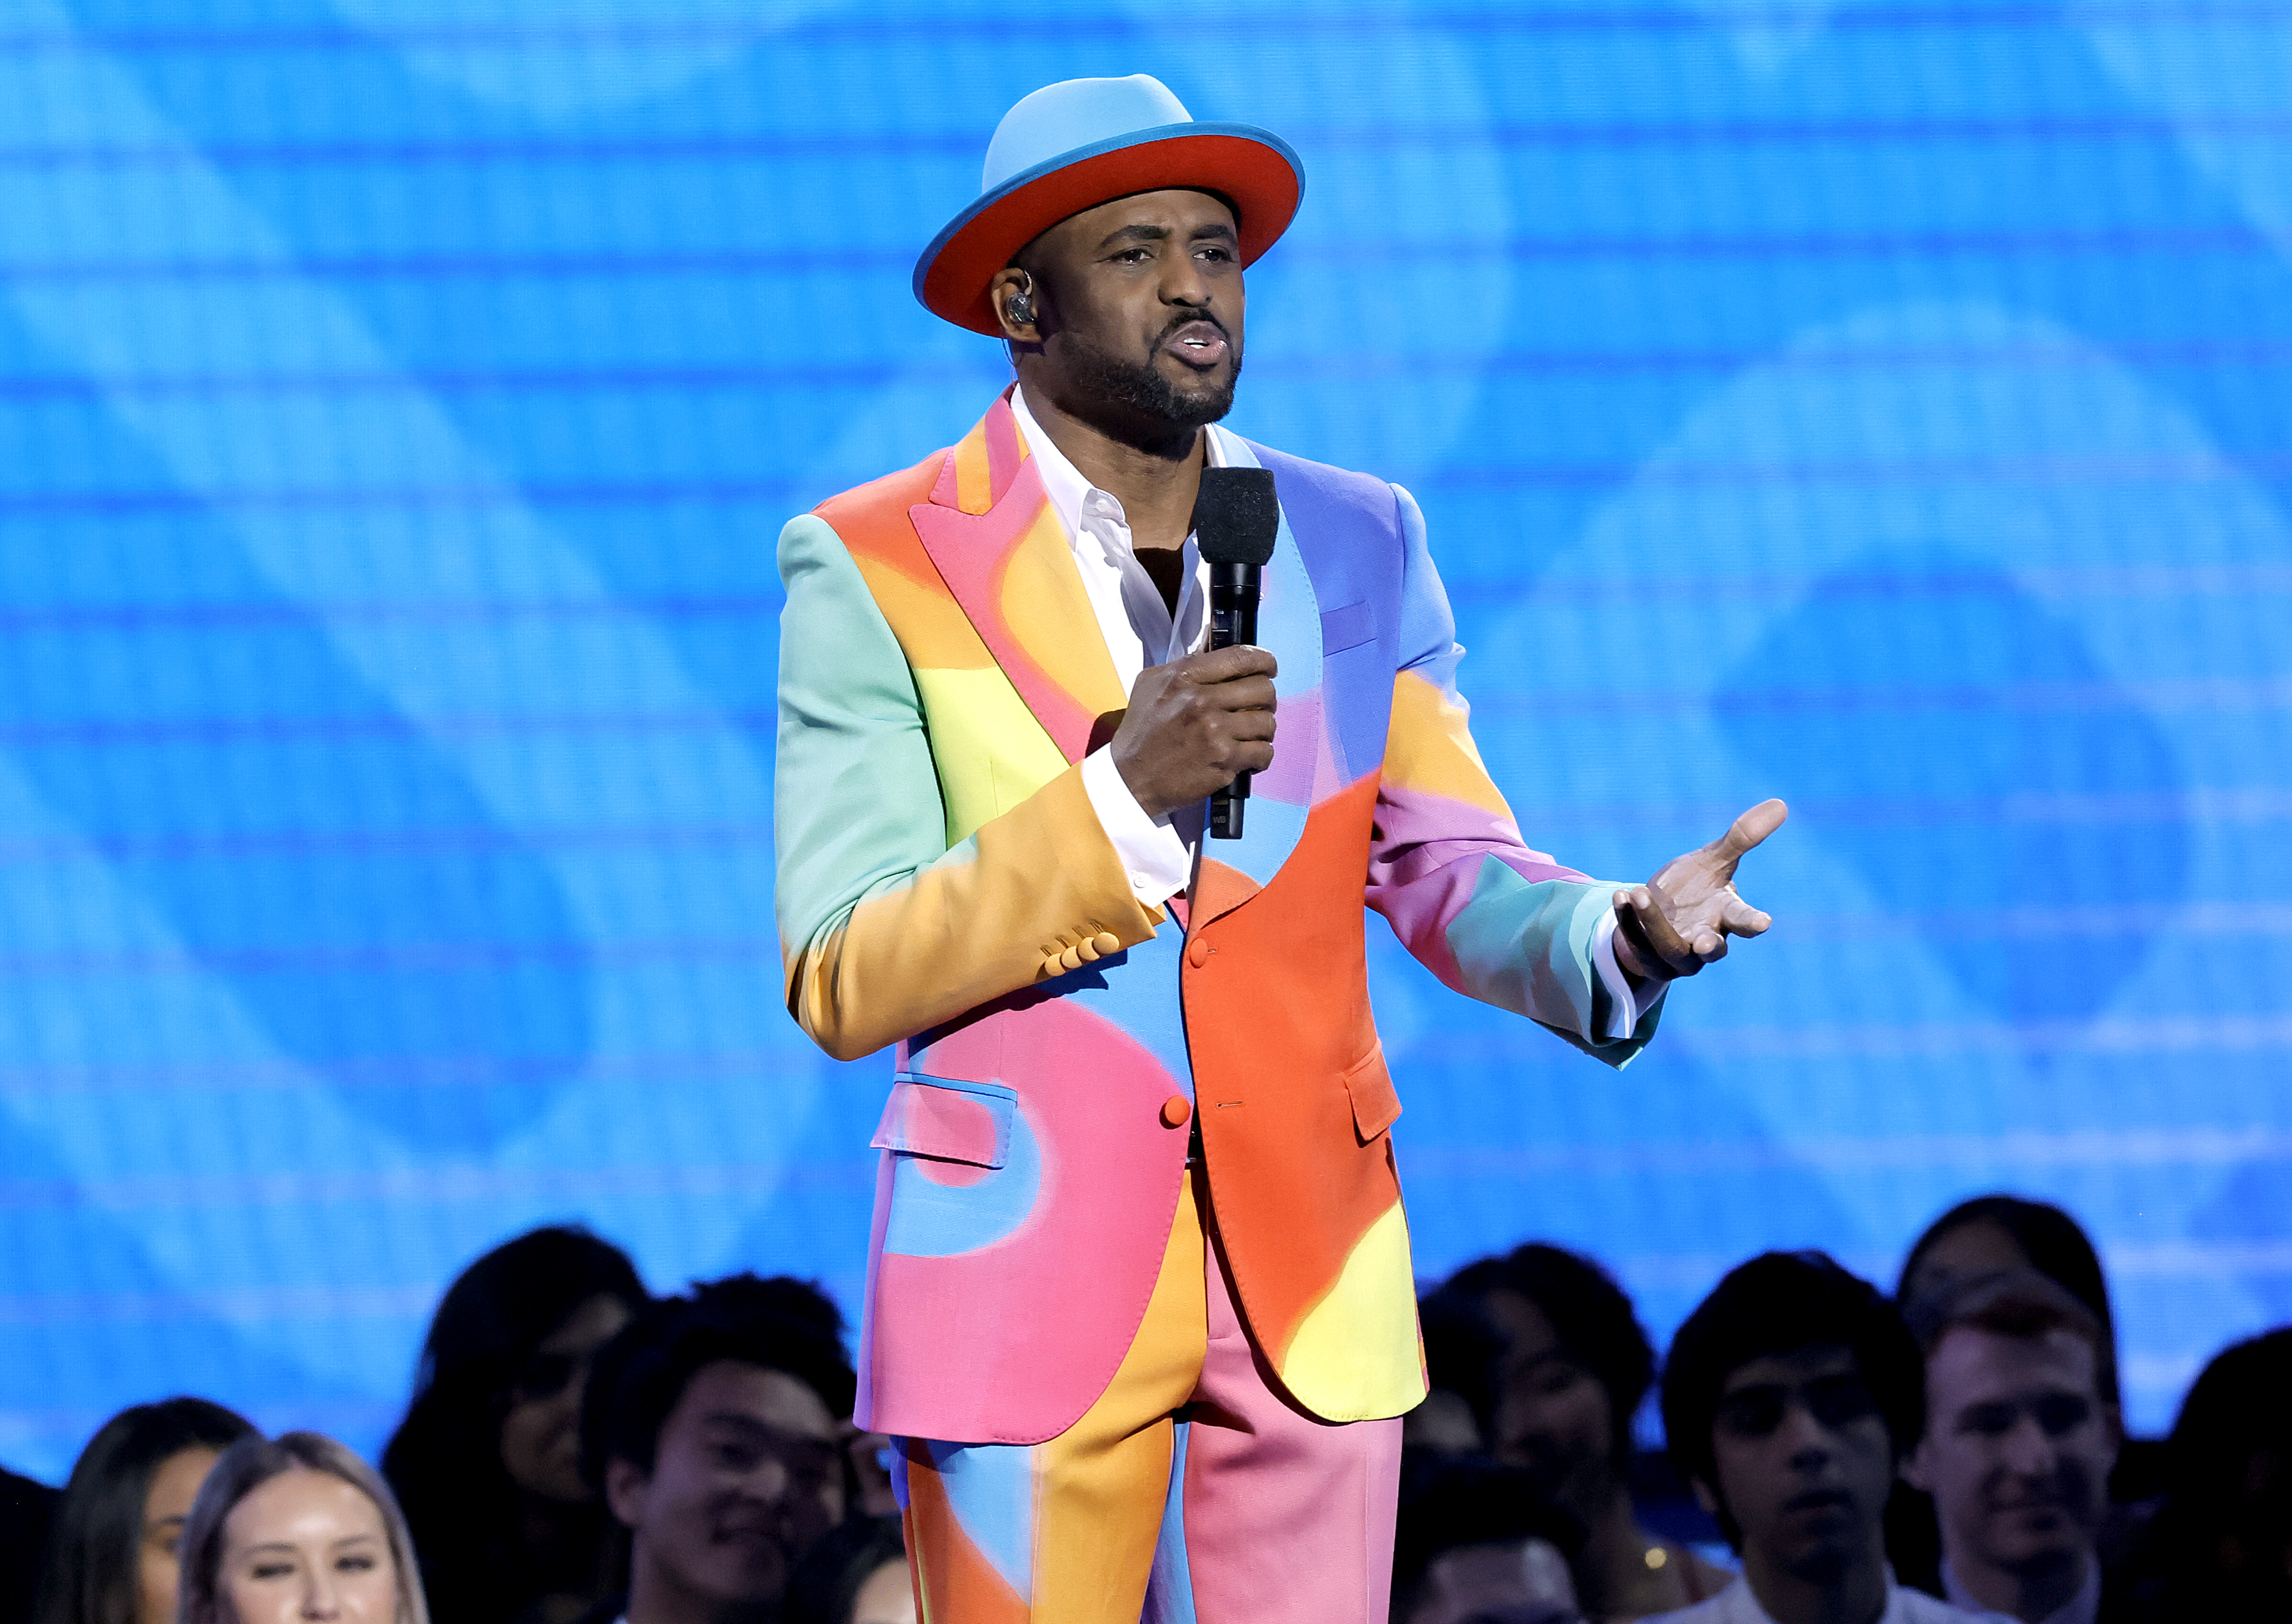 Wayne Brady speaks onstage during the 2022 American Music Awards on November 20, 2022, in Los Angeles, California. | Source: Getty Images